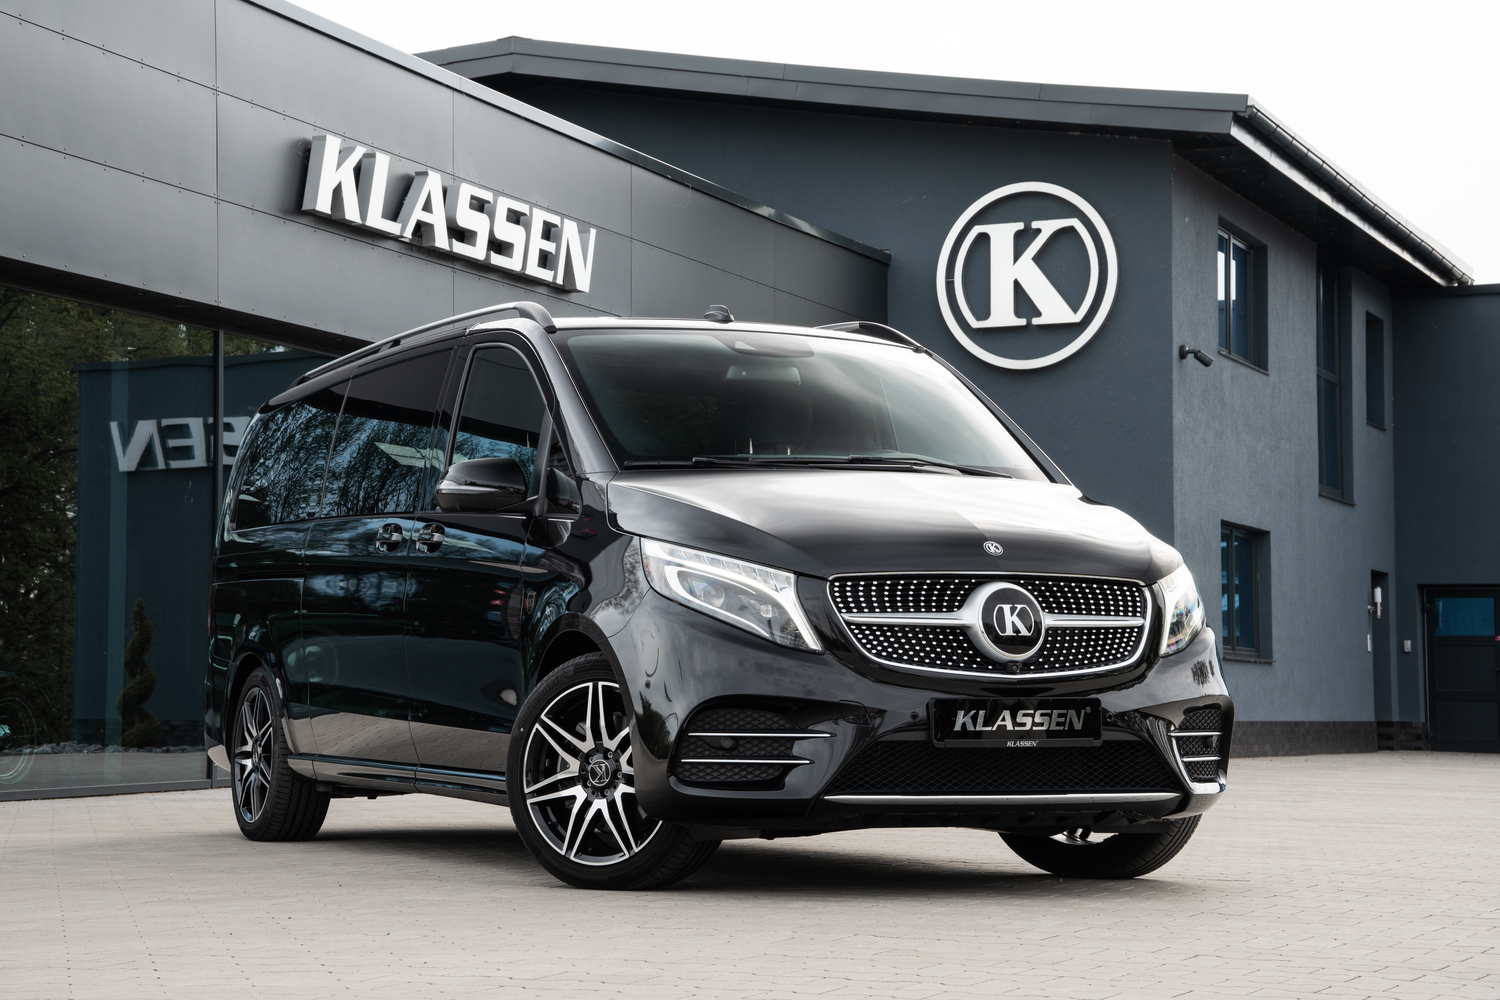 Bespoke interior combined with exclusive Materials manufactured in Germany by KLASSEN. Manufactured in Germany. Check out all new available First Class Vans. Worldwide delivery. Limited First Class Vans. Exclusive Upholstery. Worldwide warranty